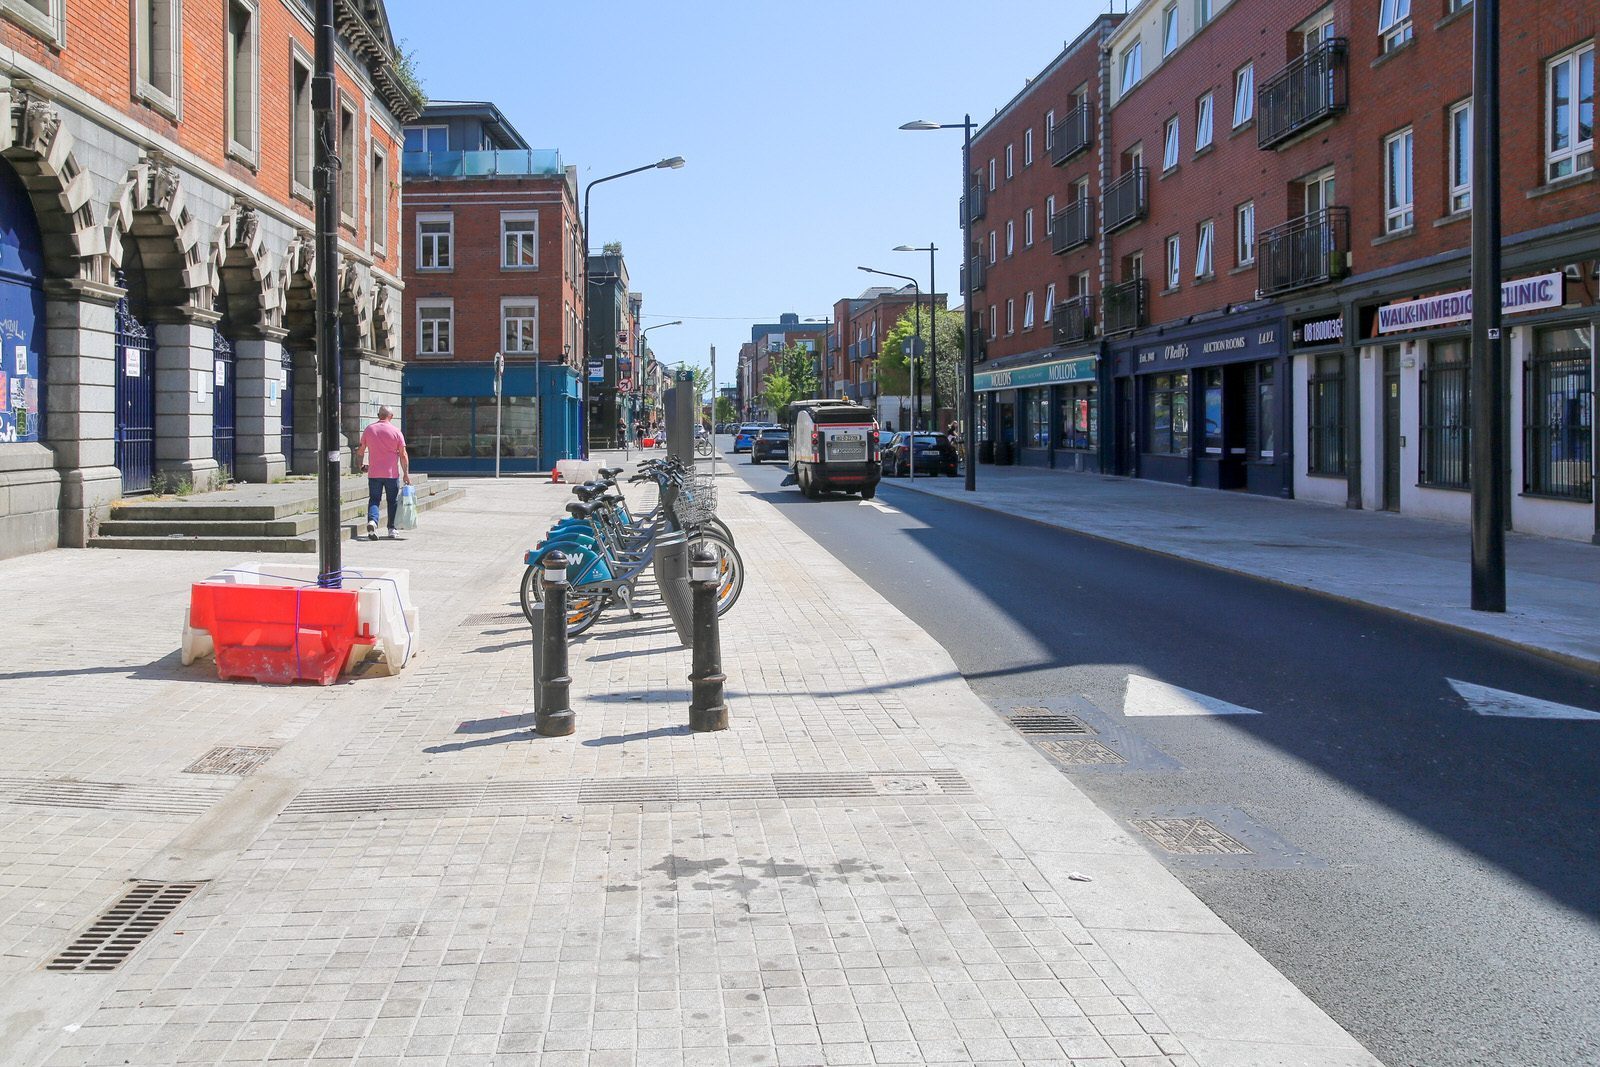 DUBLINBIKES DOCKING STATION 73 [AT THE OLD IVEAGH MARKETS BUILDING ON FRANCIS STREET] 006